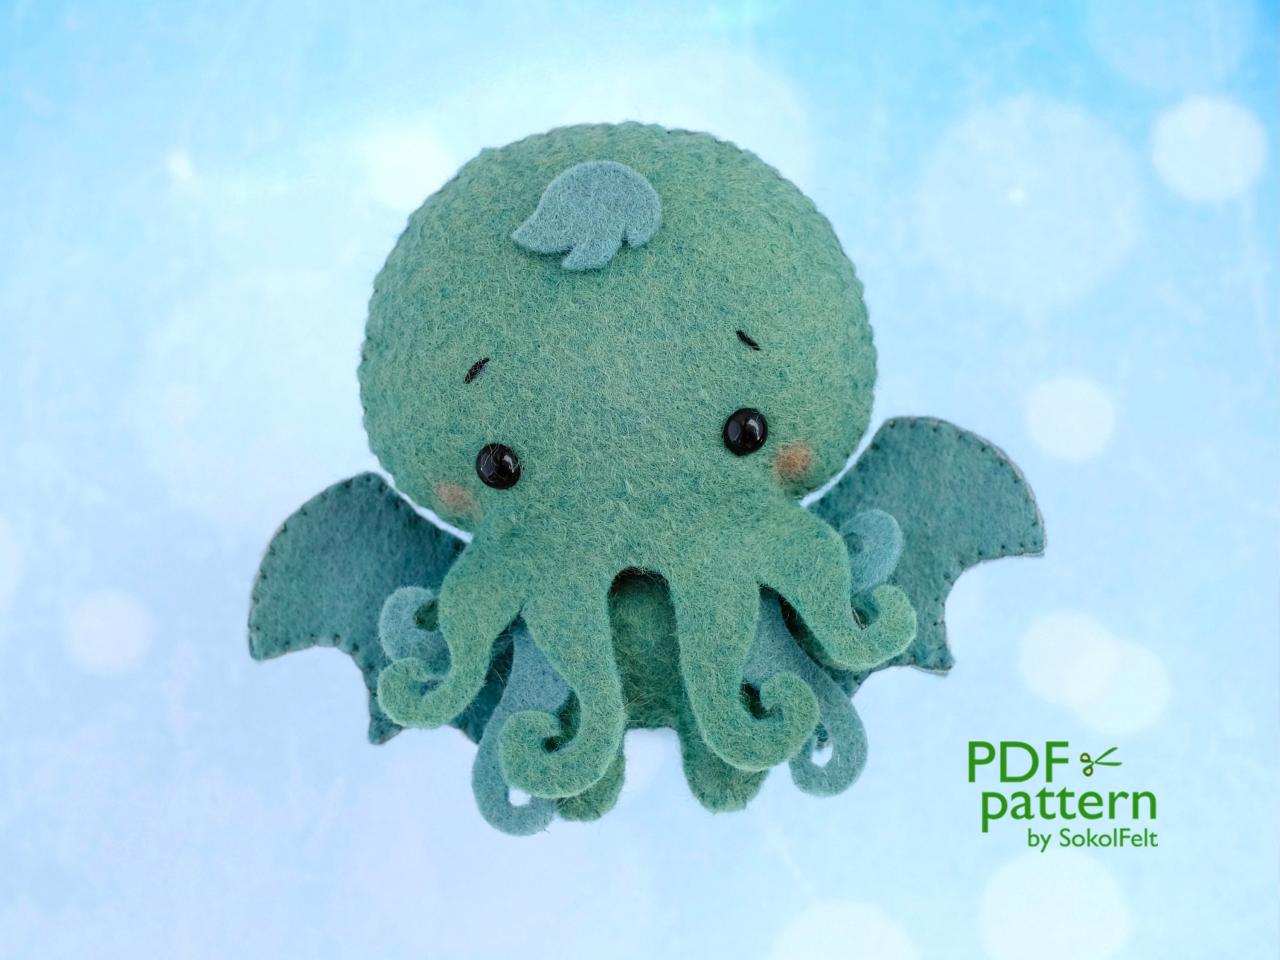 Baby Cthulhu Felt Toy Sewing Pdf And Svg Pattern, The Call Of Cthulhu, Lovecraft, Halloween Toy Pattern, Plush Toy Sewing Tutorial